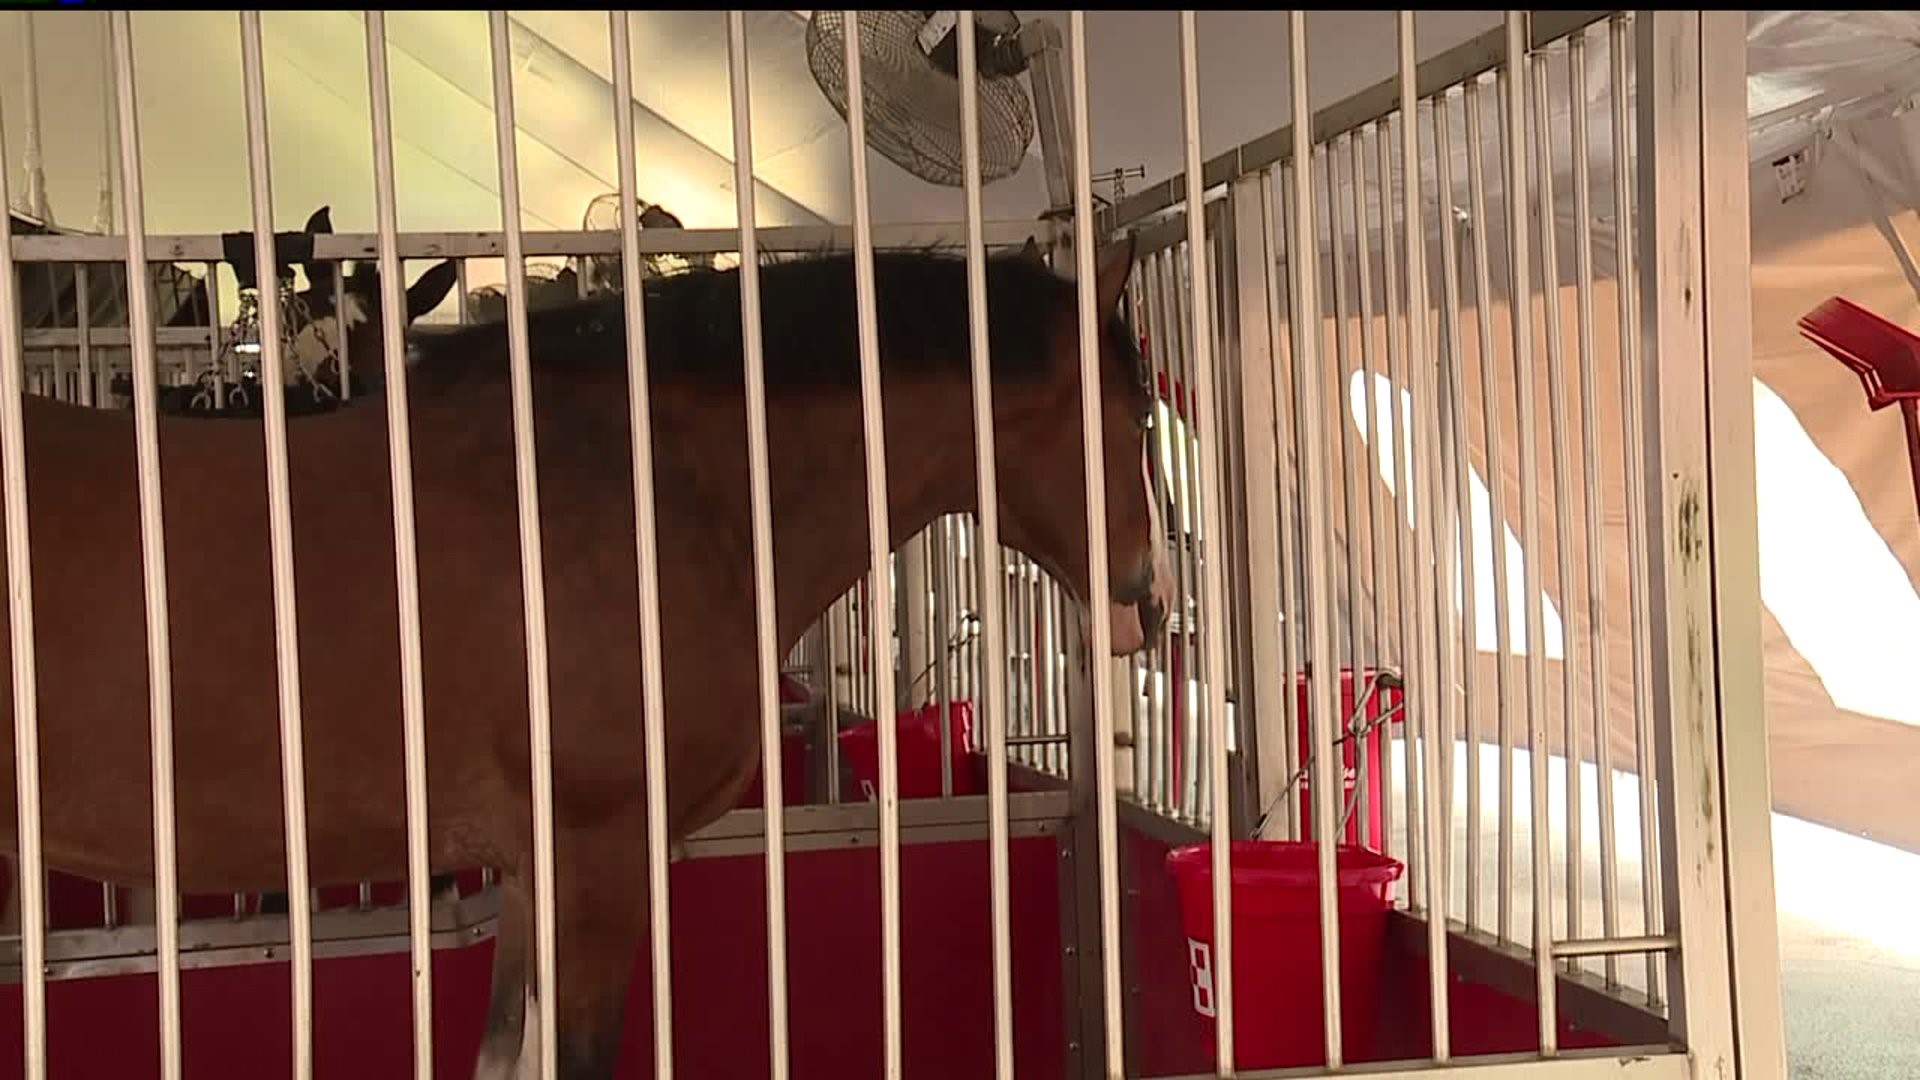 Budweiser Clydesdale`s spend last day in York County for "Made in America" tour